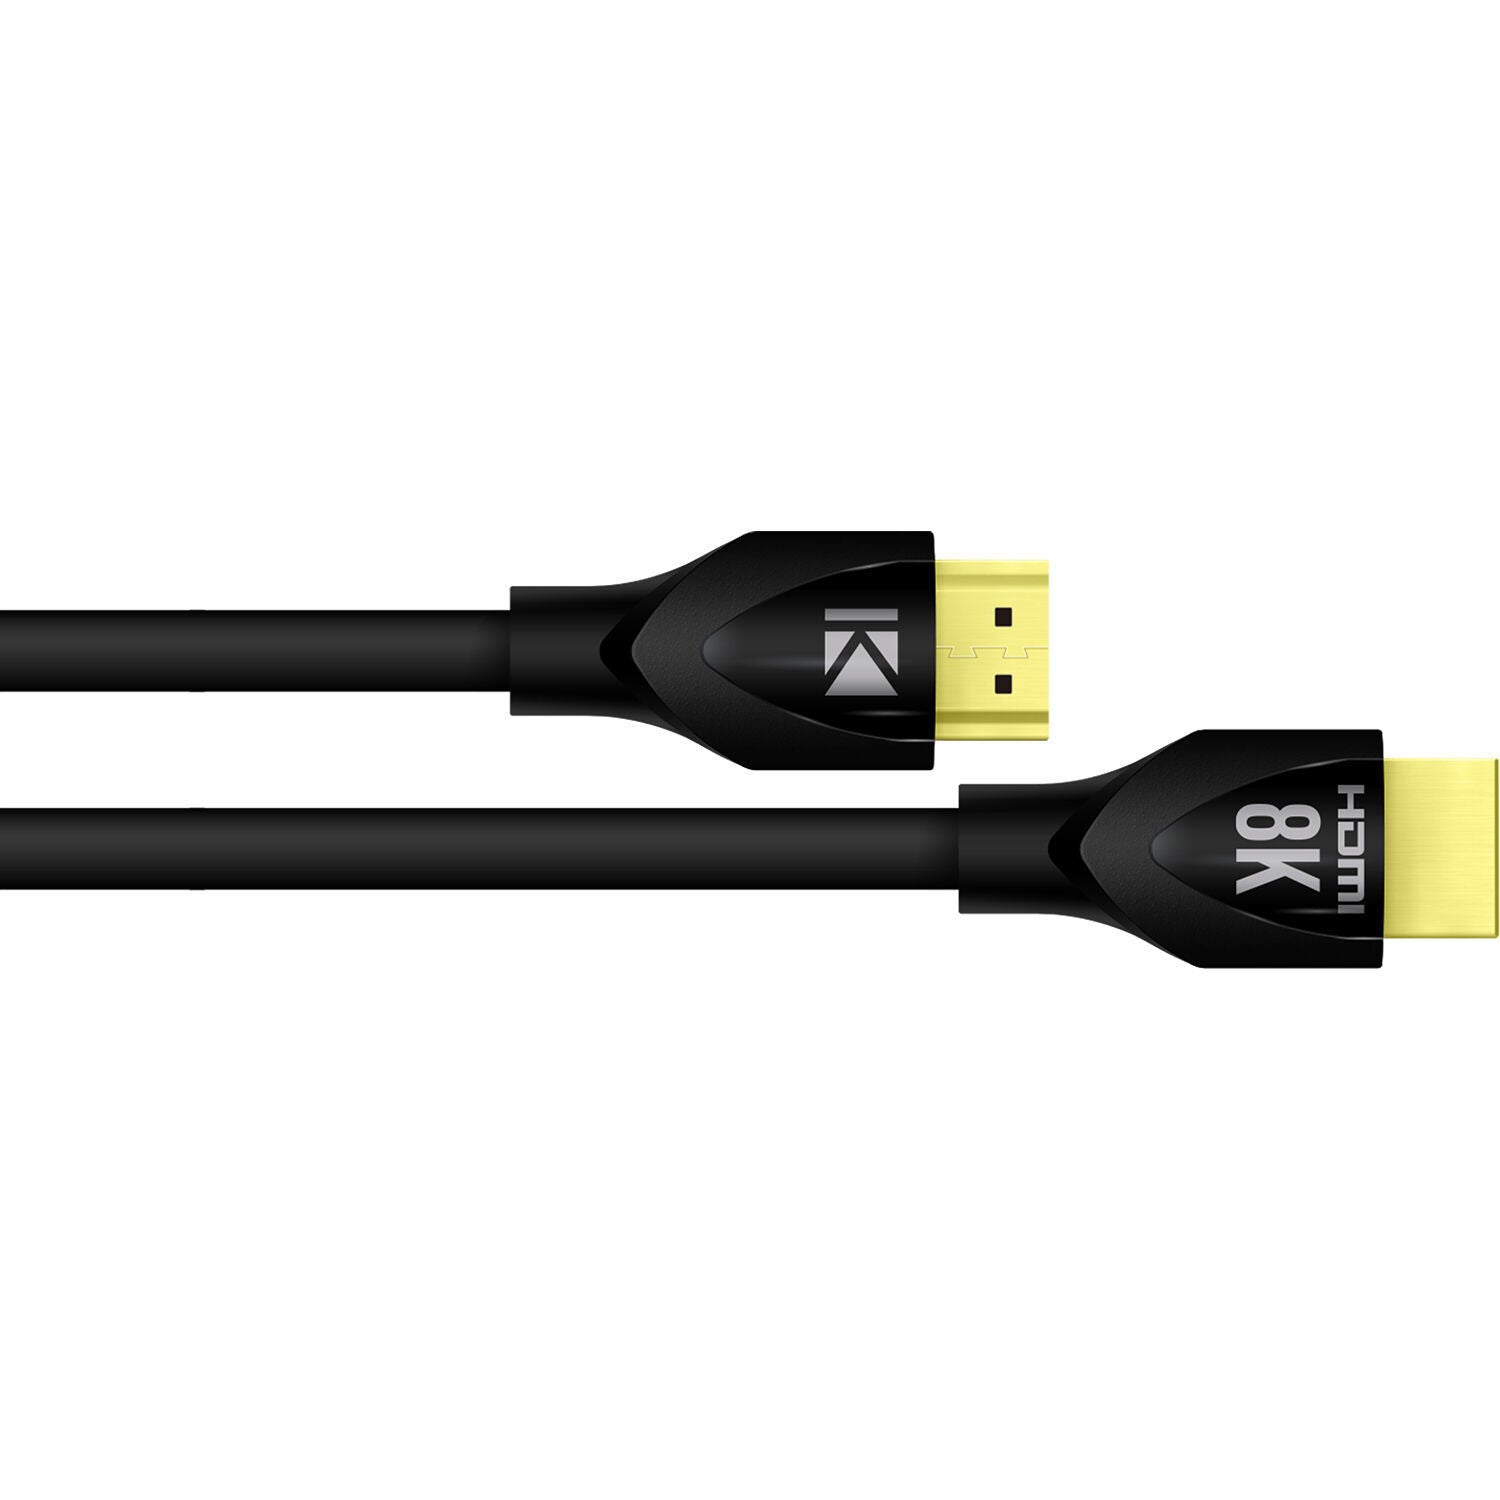 Key Digital 8K/48G HDMI Cable, HDCP2.3, eARC, 30 AWG - 6ft/1.8m